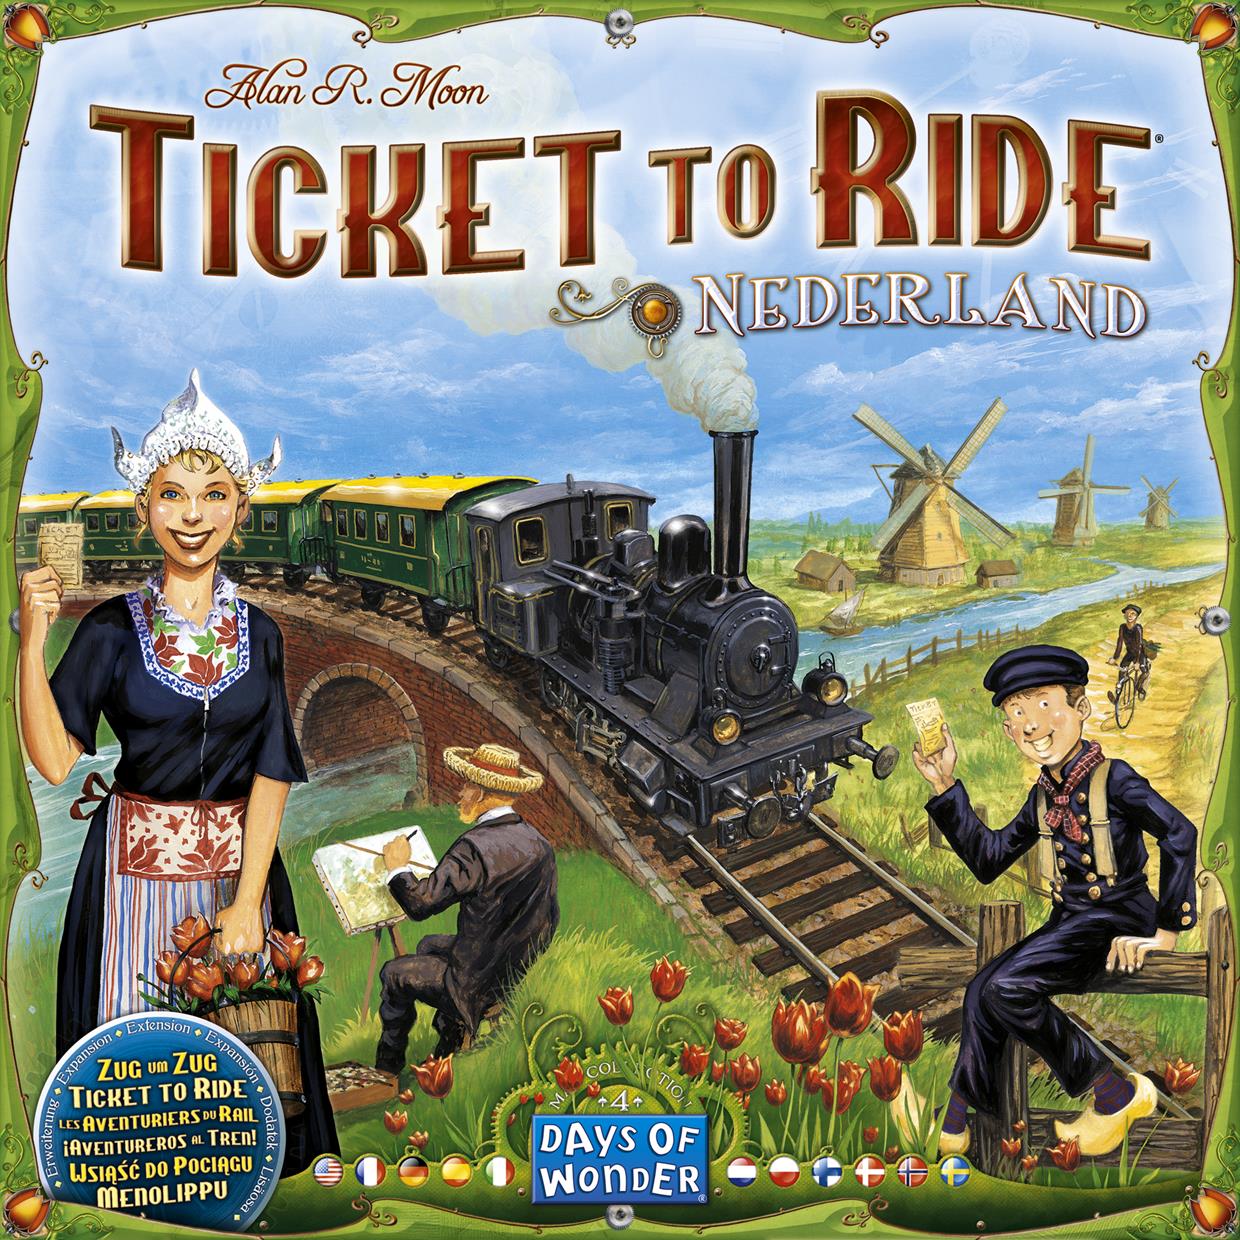 Ticket to Ride Map Collection: Vol 4 - Nederland